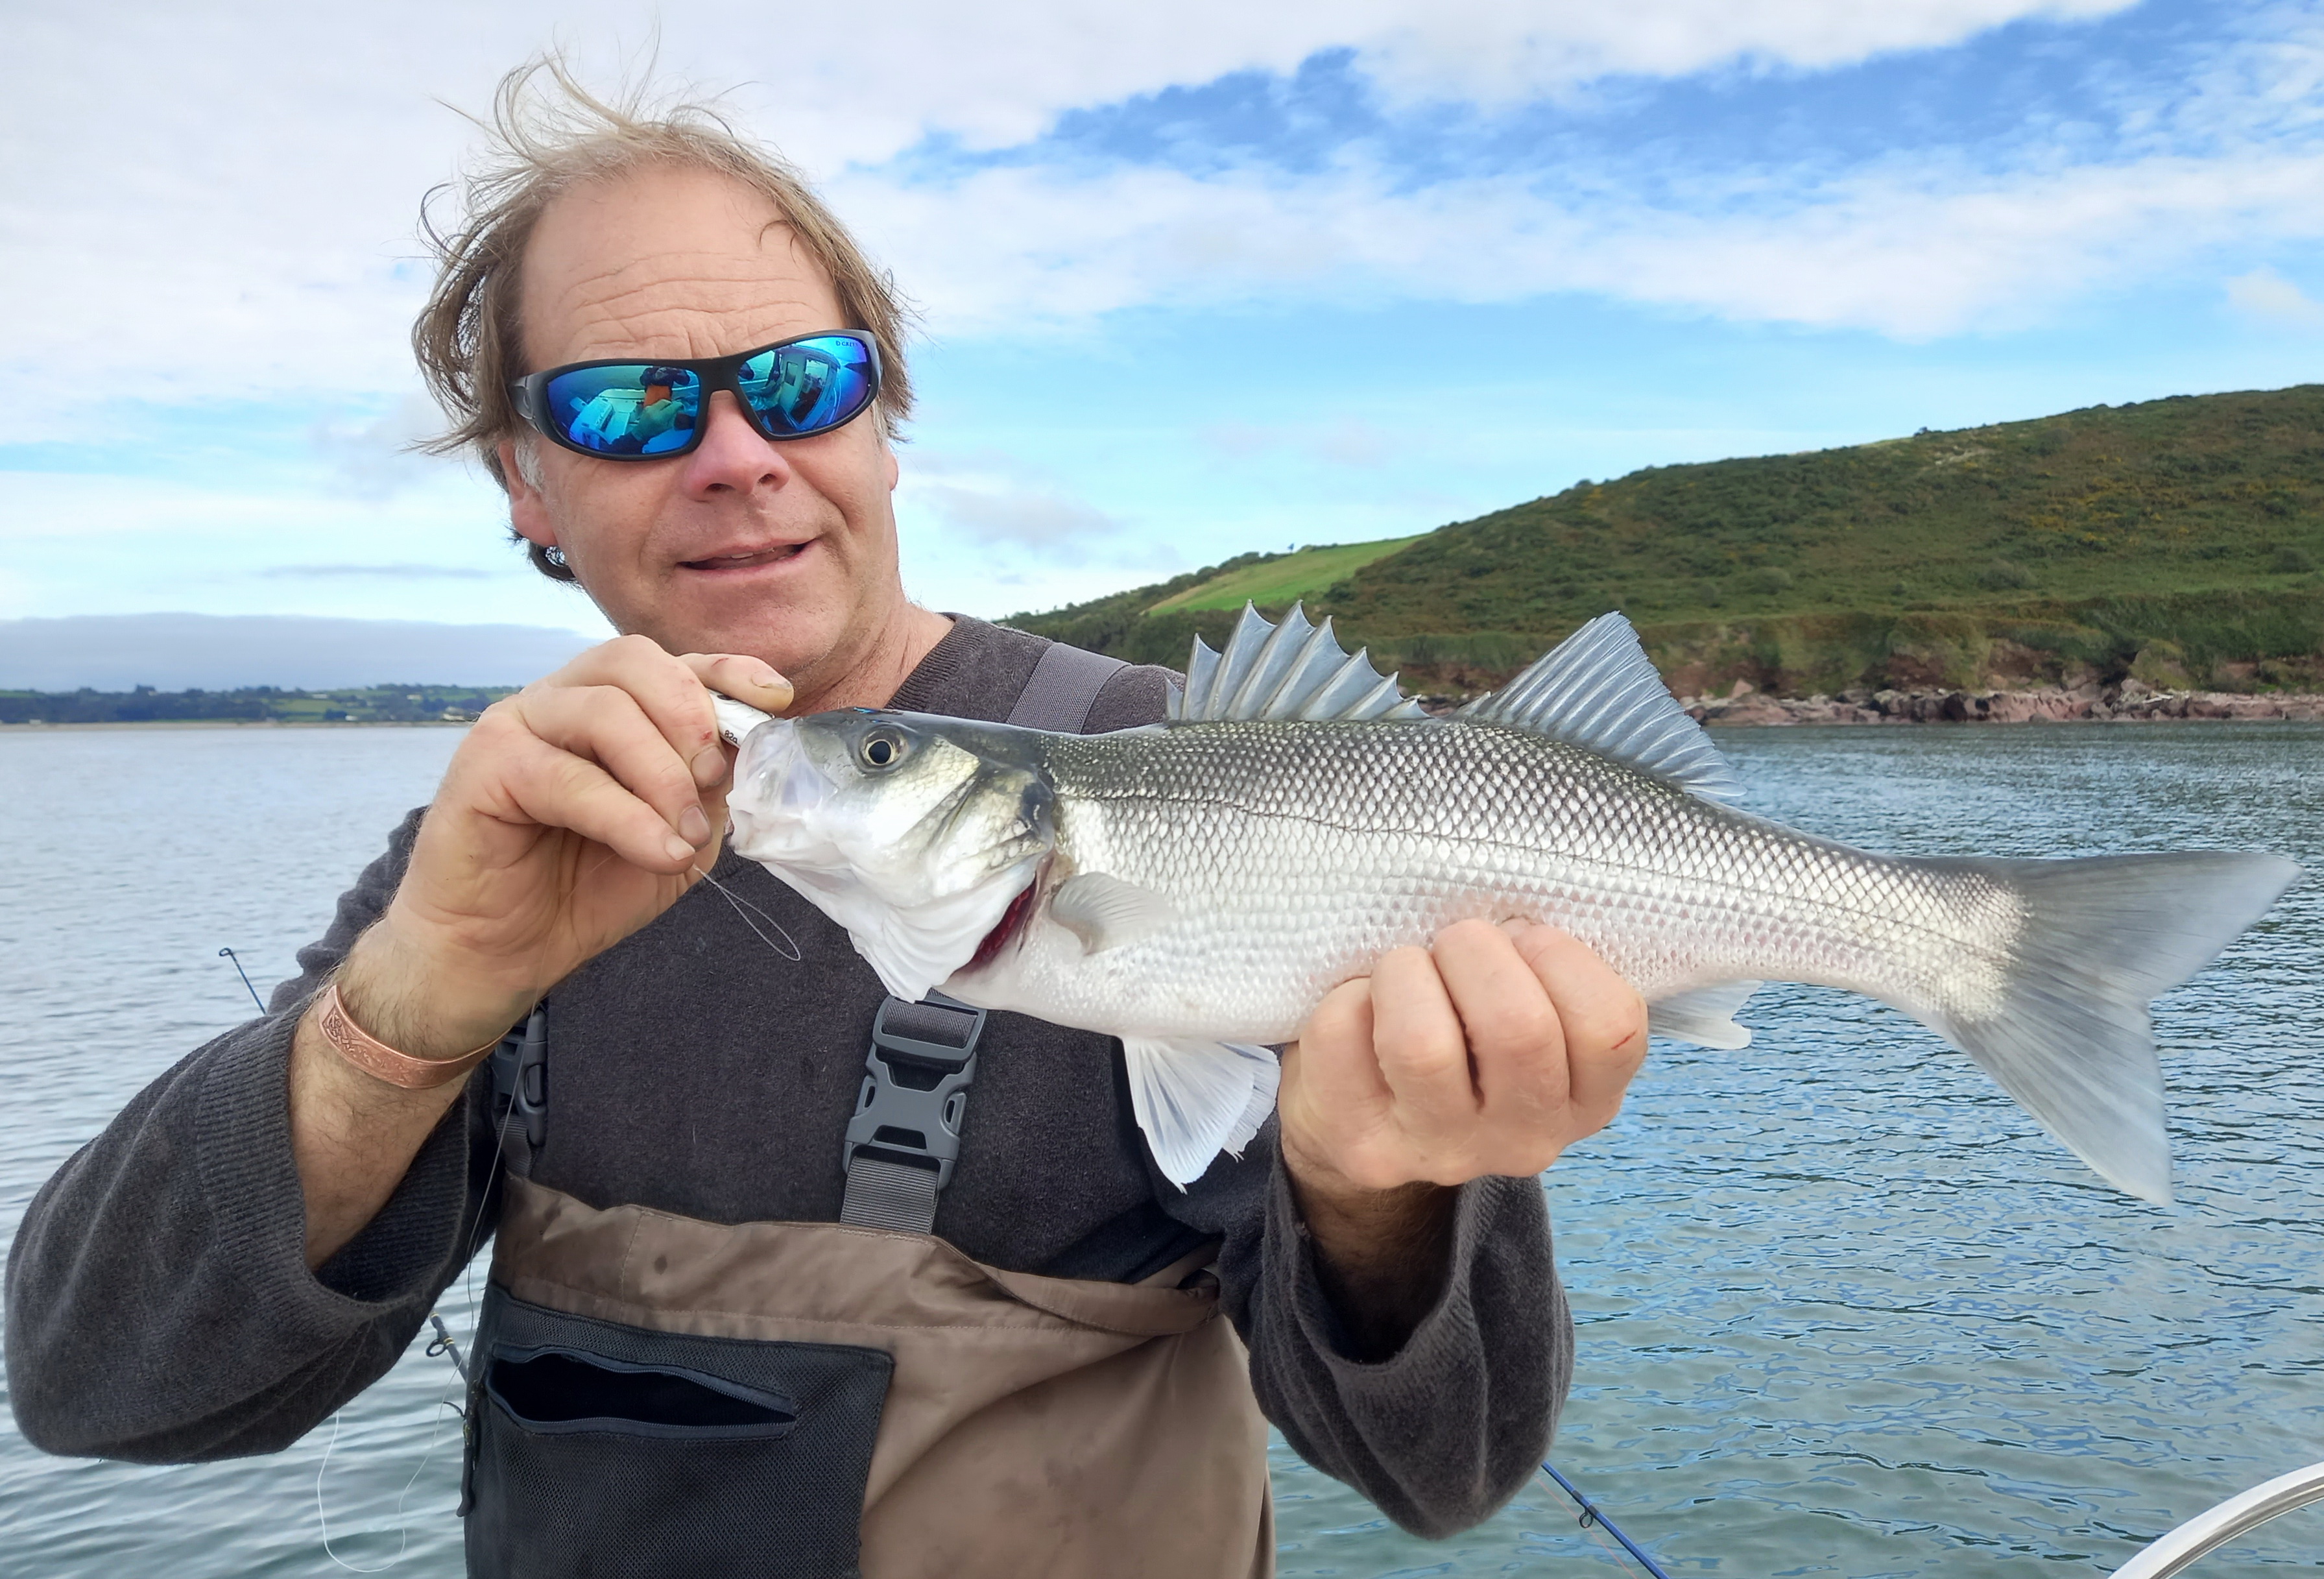 Youghal Harbour Bass Fishing Pollock fishing Terry's Travels